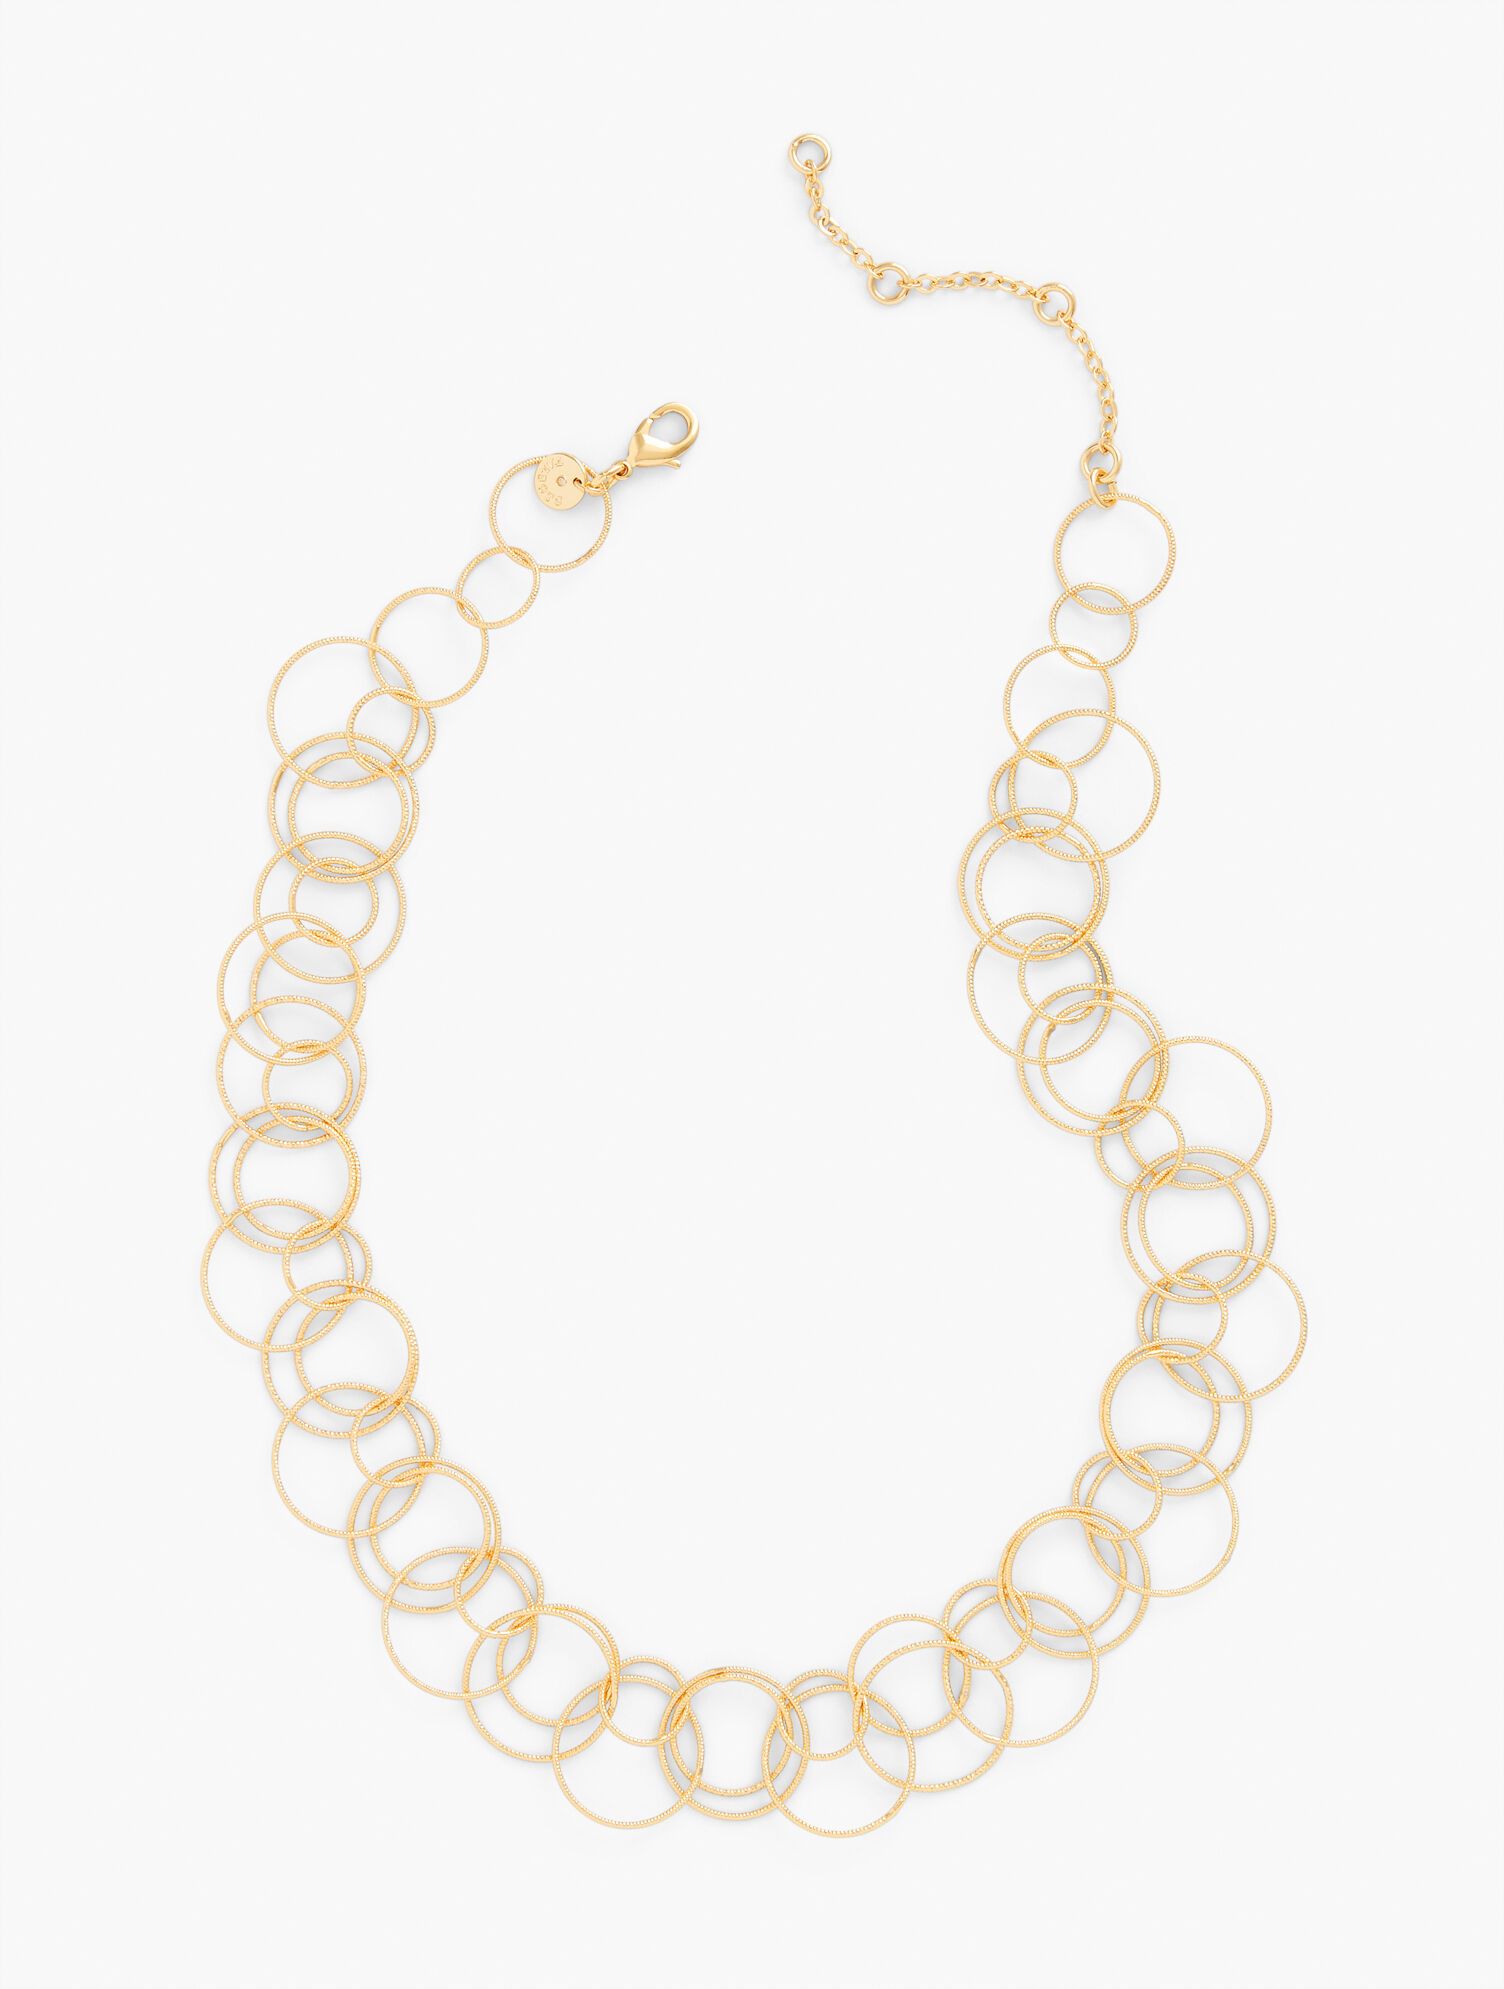 Rings Necklace | Talbots